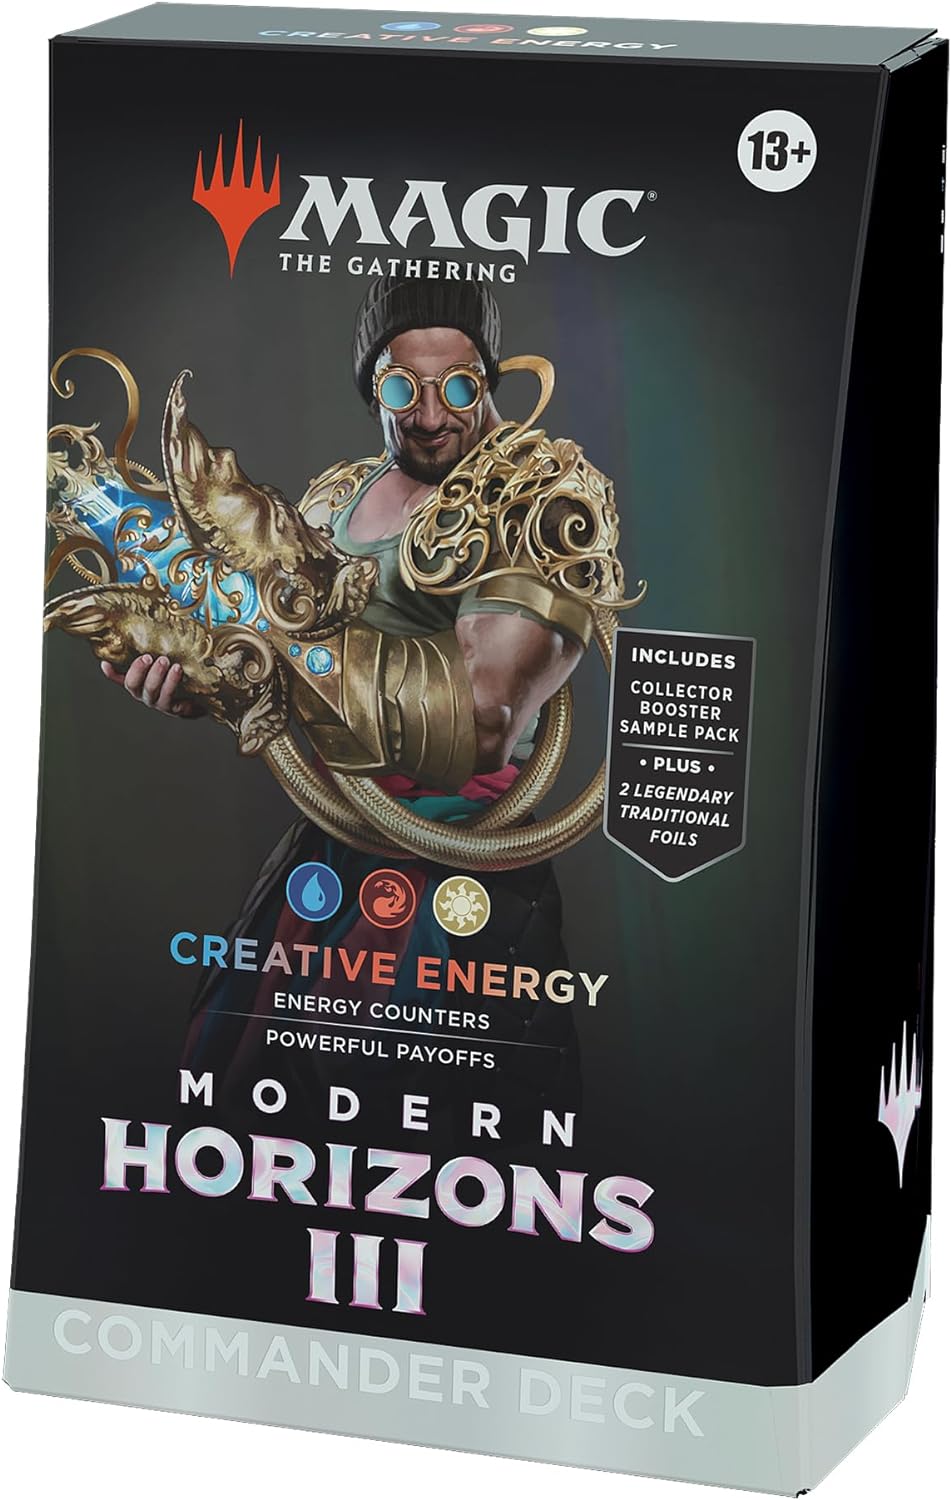 PRE-ORDER: Modern Horizons 3 Commander Deck - Creative Energy (100-Card Deck, 2-Card Collector Booster Sample Pack + Accessories), Trading Cards made by Exit 23 Games. Exit 23 Games 